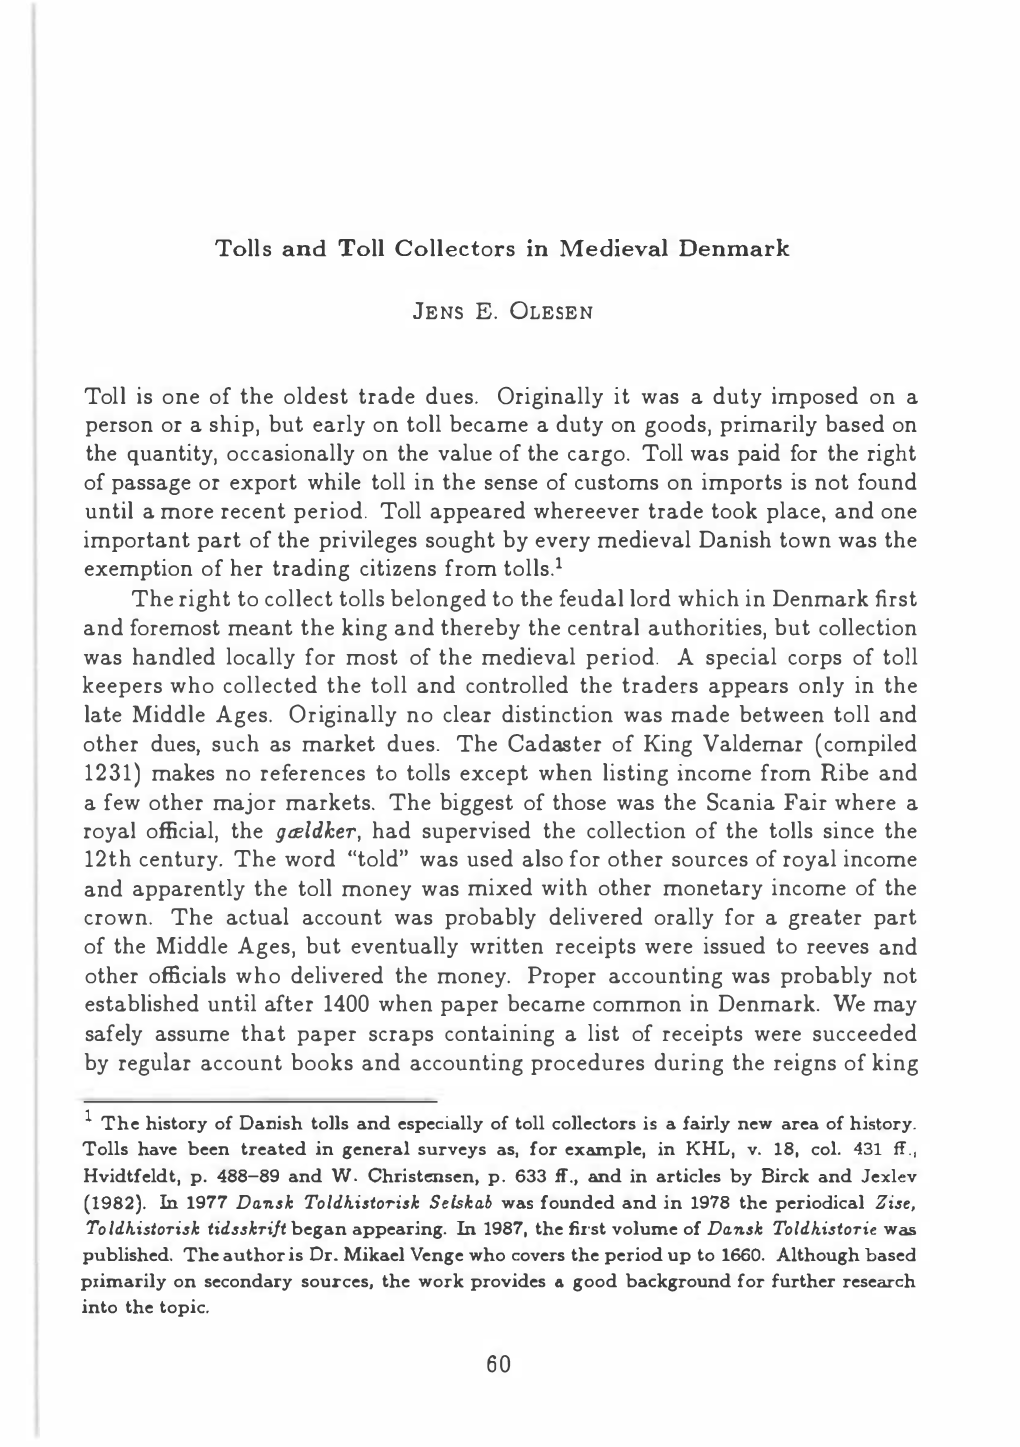 Toll Is One of the Oldest Trade Dues. Originally It Was a Duty Imposed on a Person Or a Ship, but Early on Toll Became a Duty On